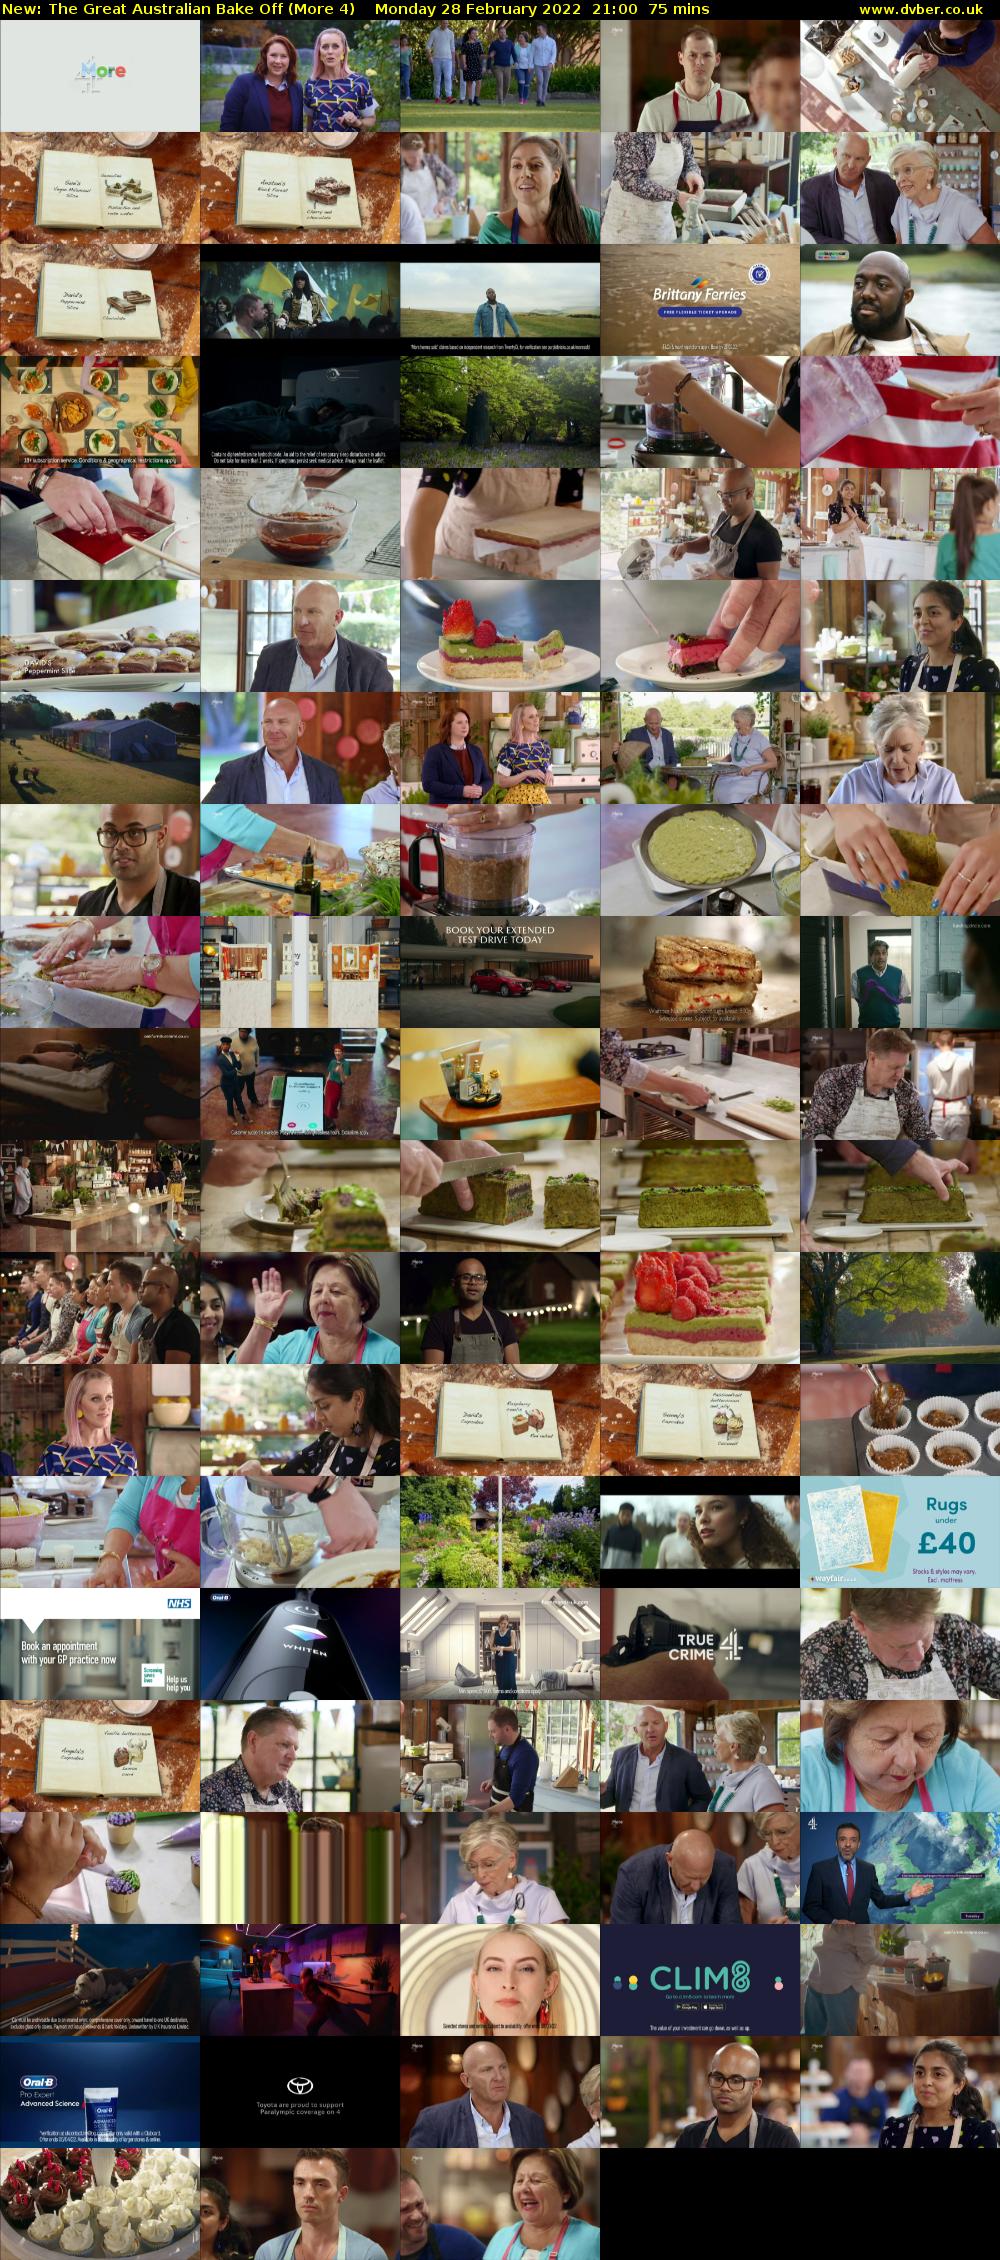 The Great Australian Bake Off (More 4) Monday 28 February 2022 21:00 - 22:15